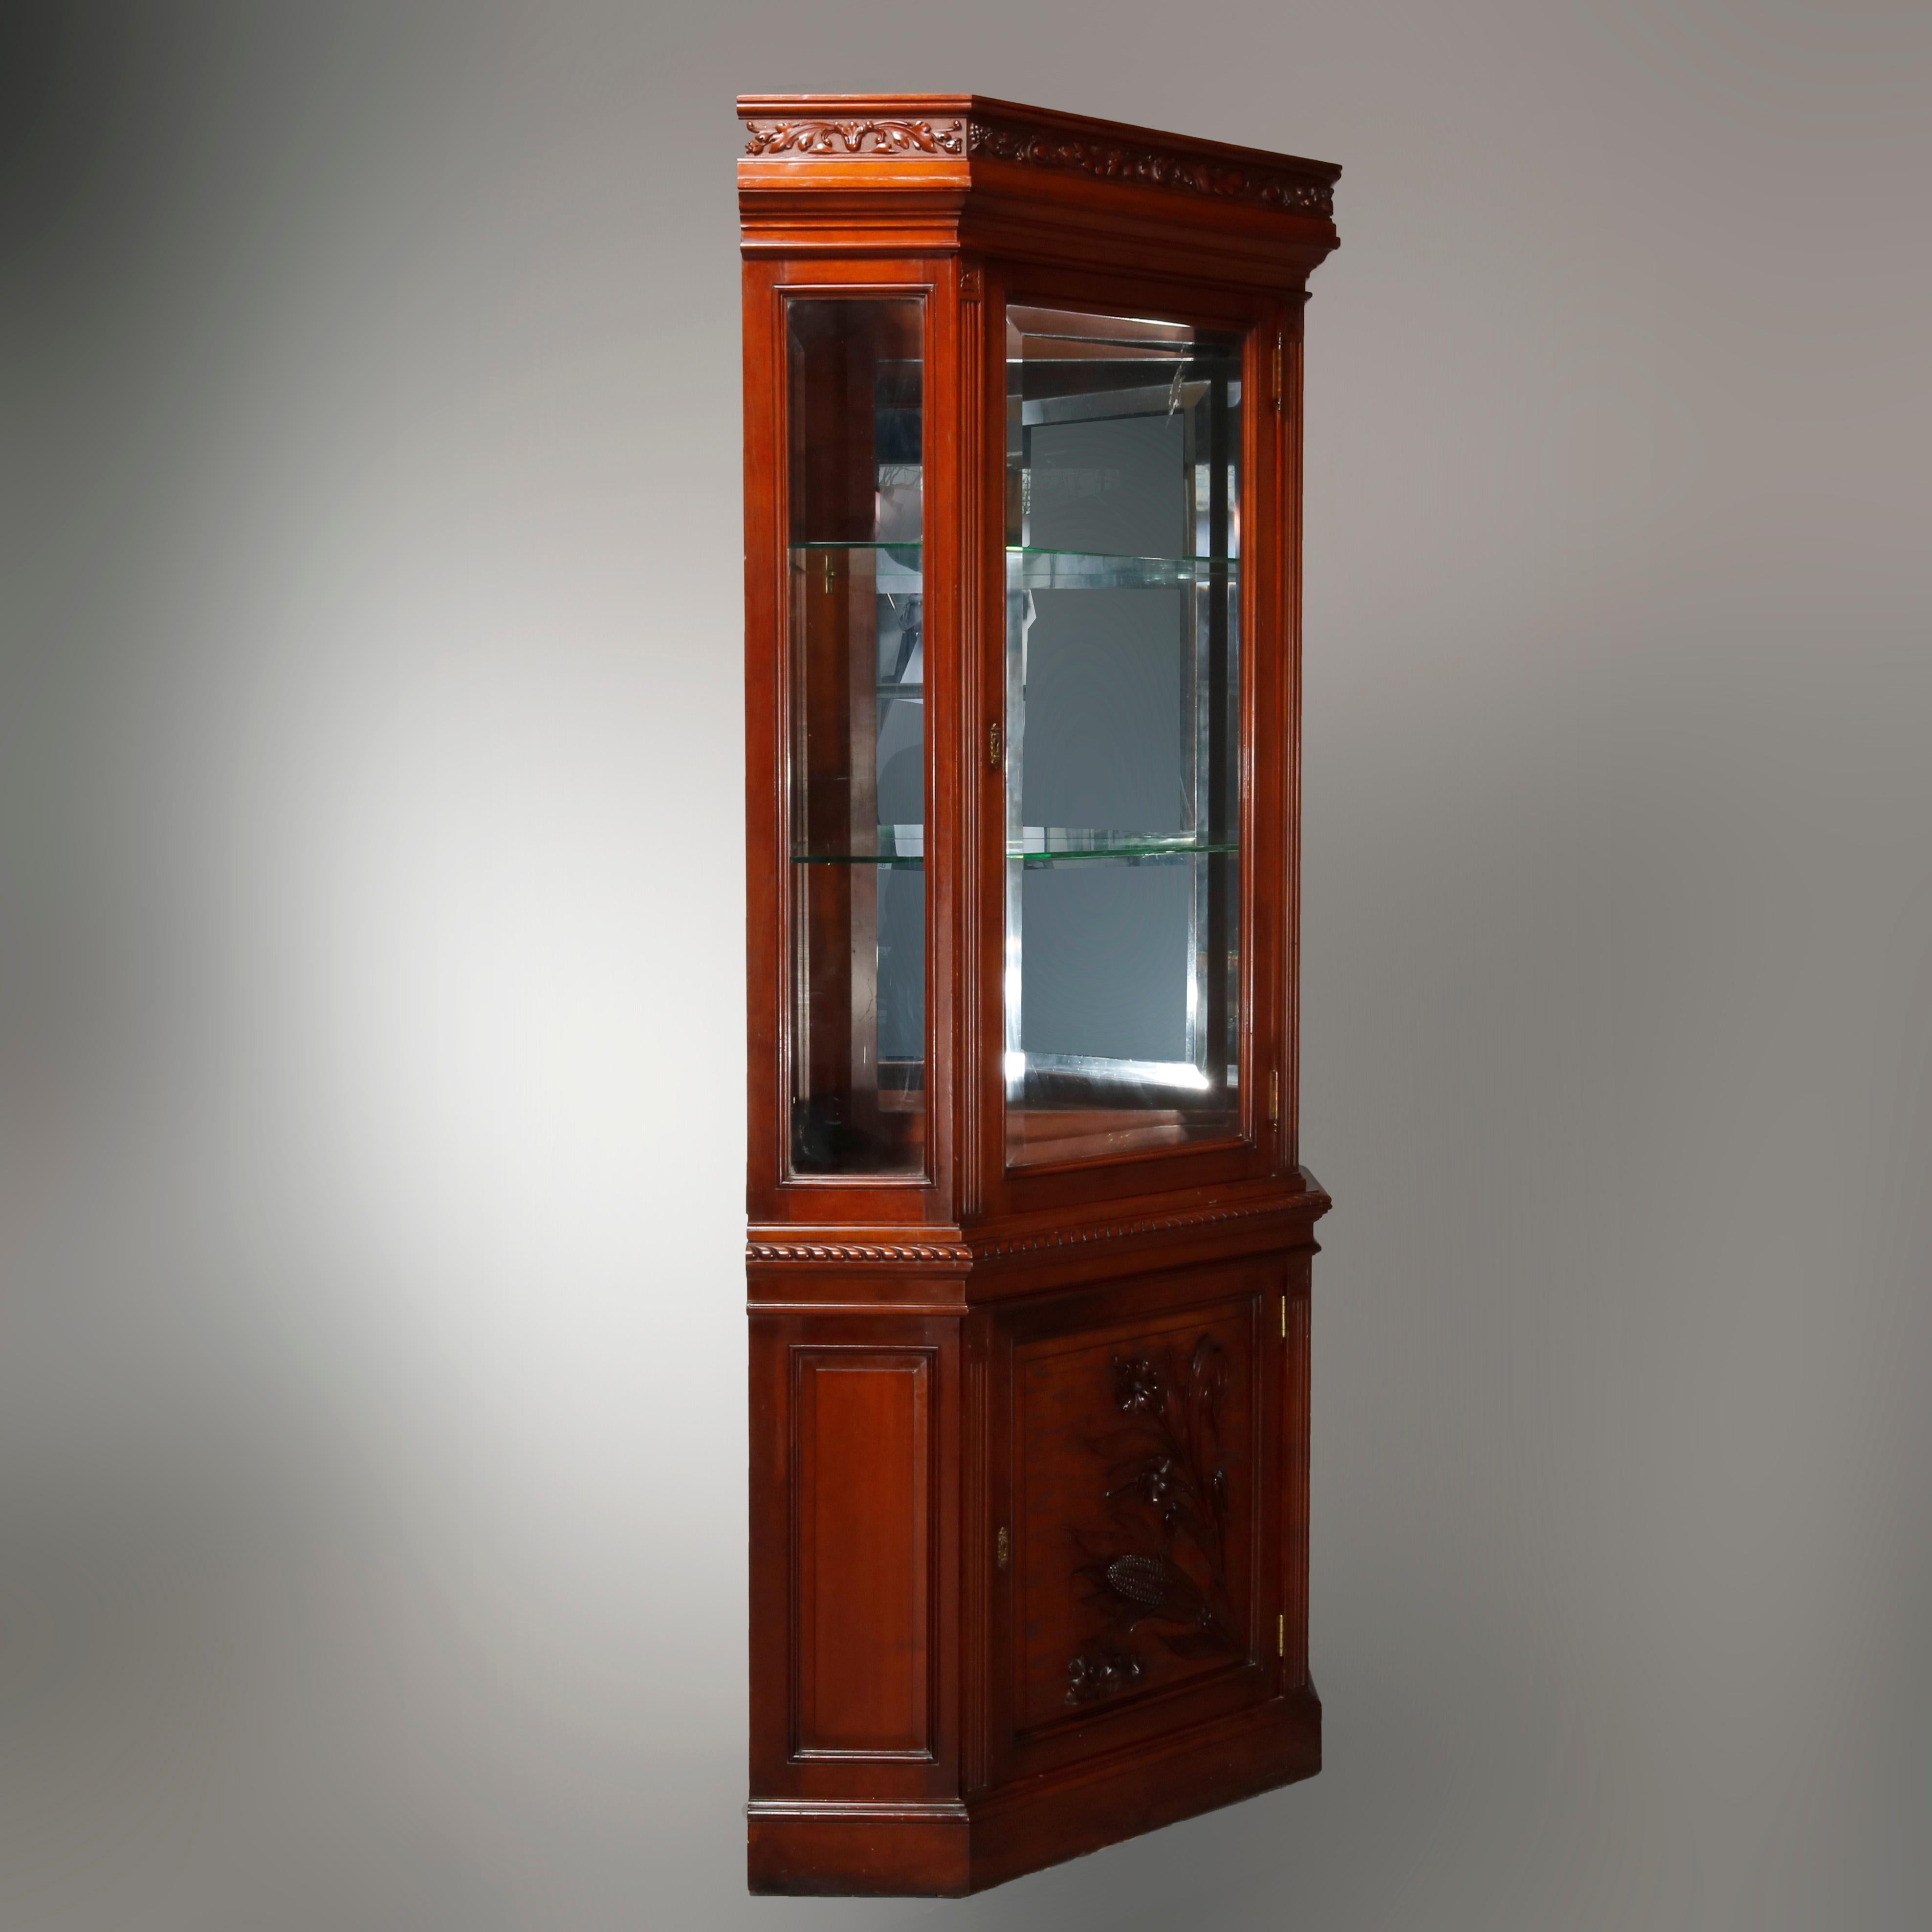 Antique Aesthetic Movement Carved Cherry Faceted & Mirrored Corner Cabinet c1890 For Sale 9